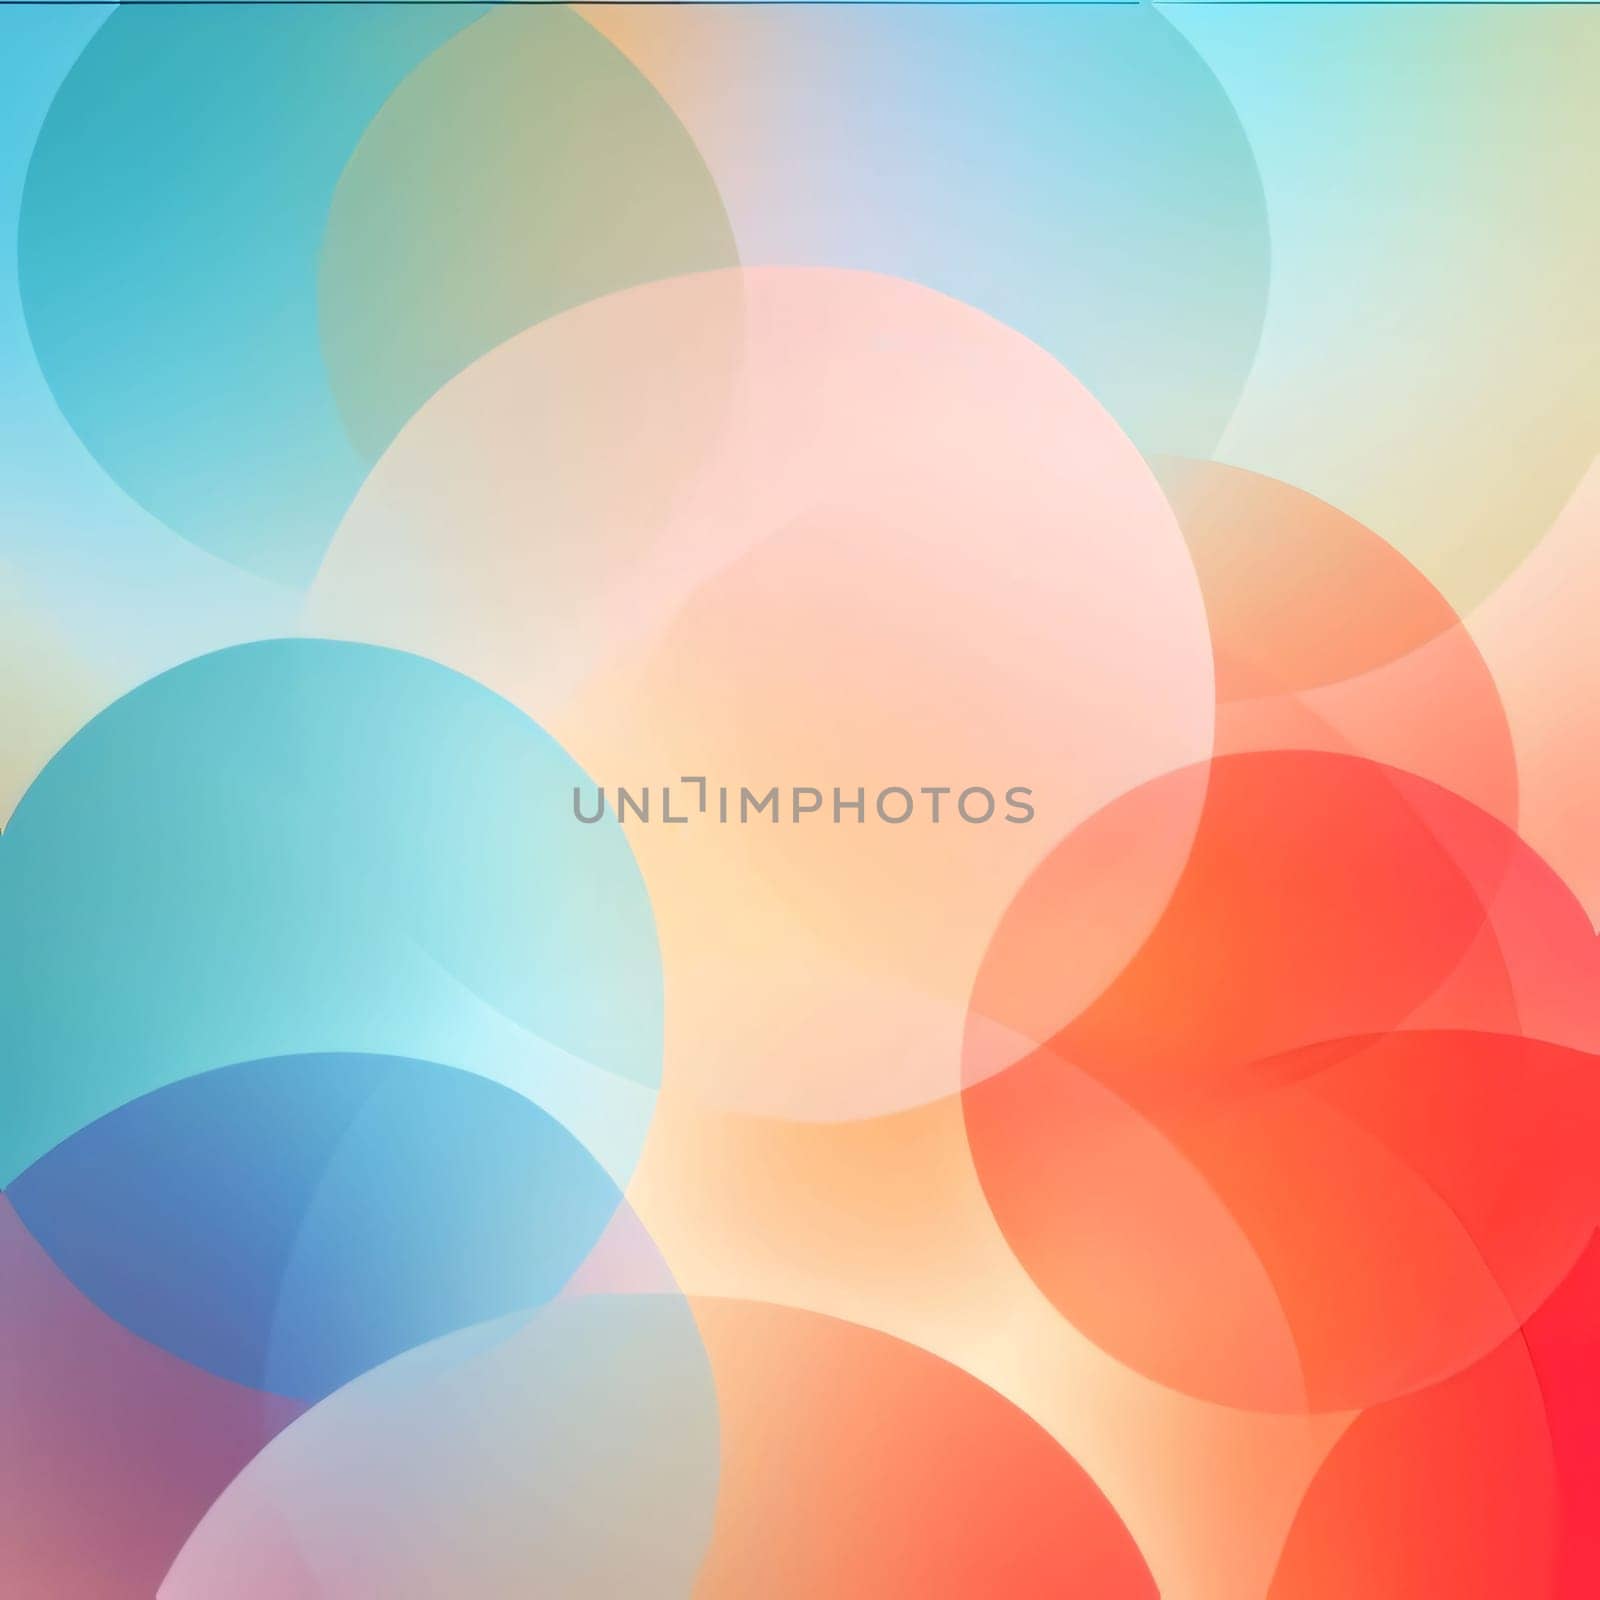 Abstract background design: Abstract background with colorful circles. Vector illustration for your graphic design.